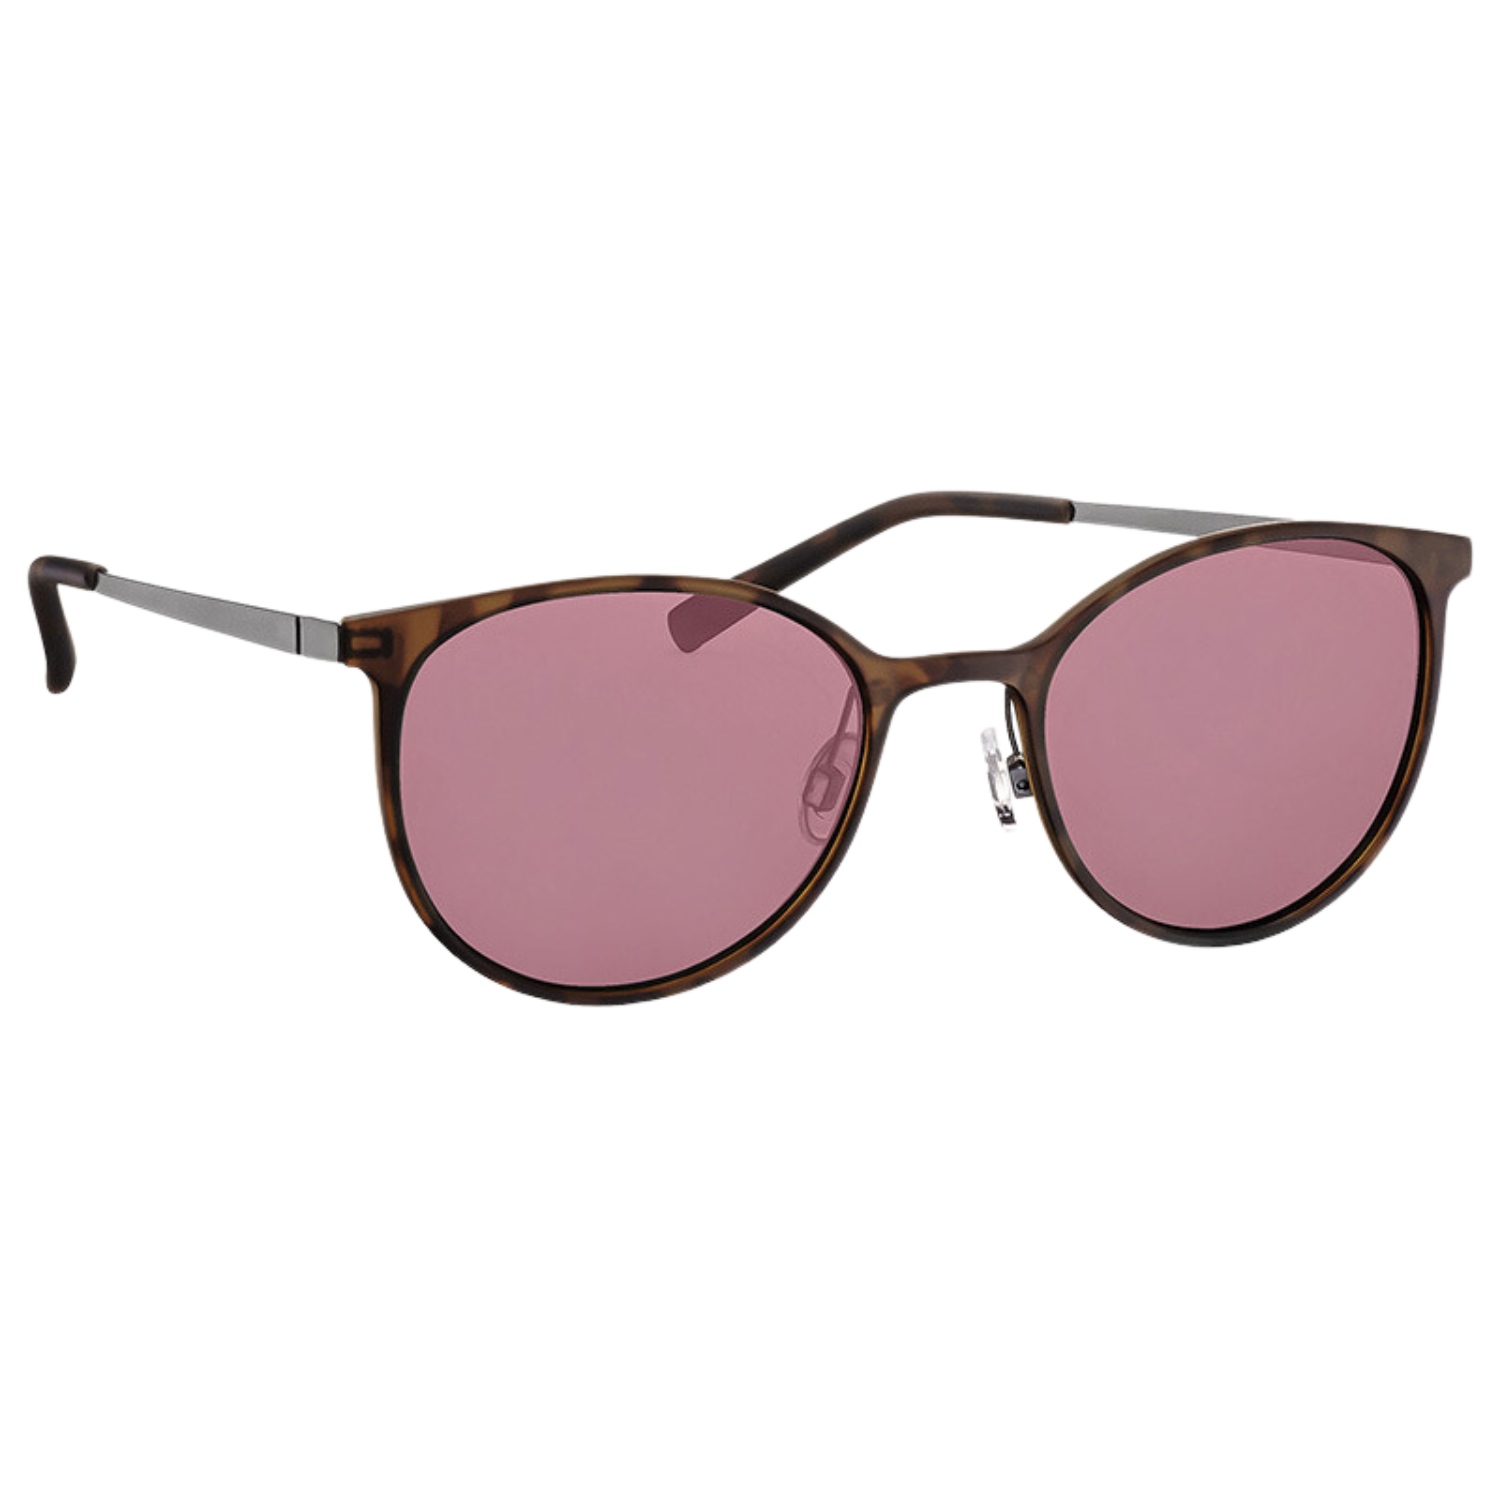 Image of the Acunis FL-41 Light Sensitivity Glasses with Brown Tortoise Acetate Frames and 50% tint lenses.